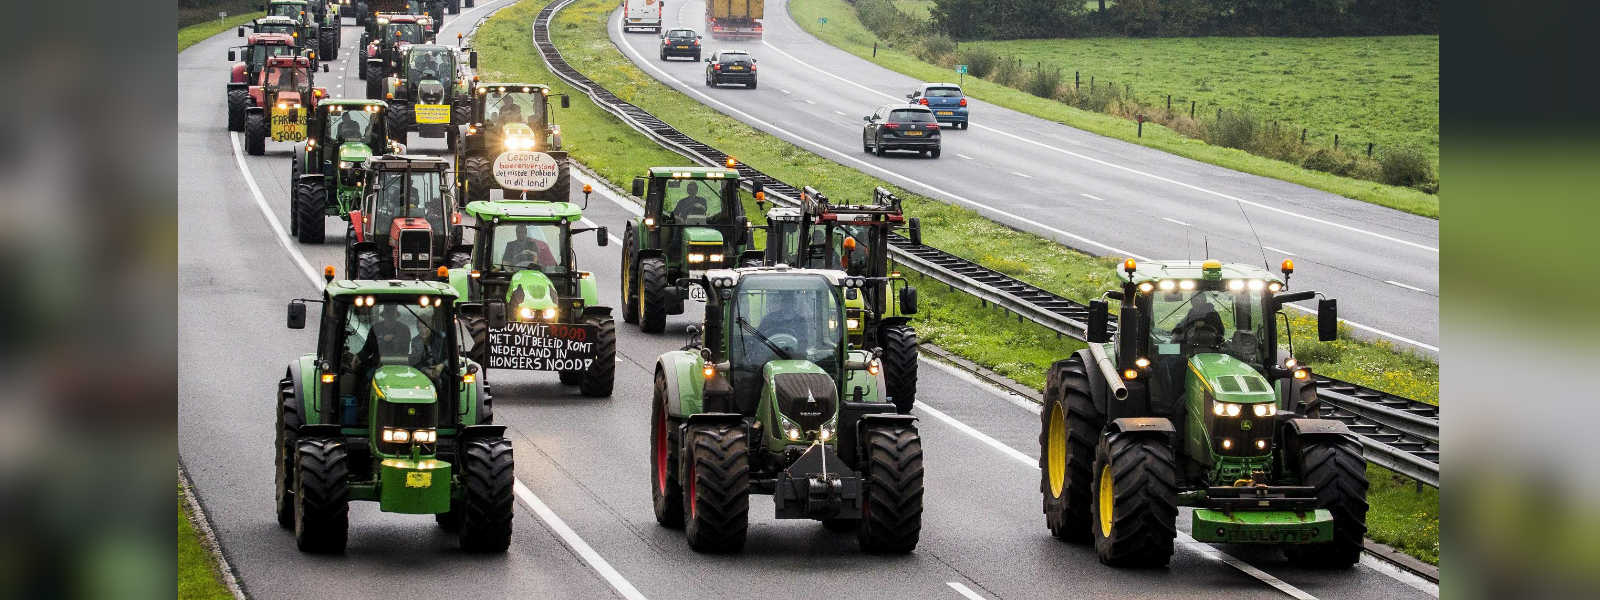 Tractors snarl Dutch roads in emissions protest